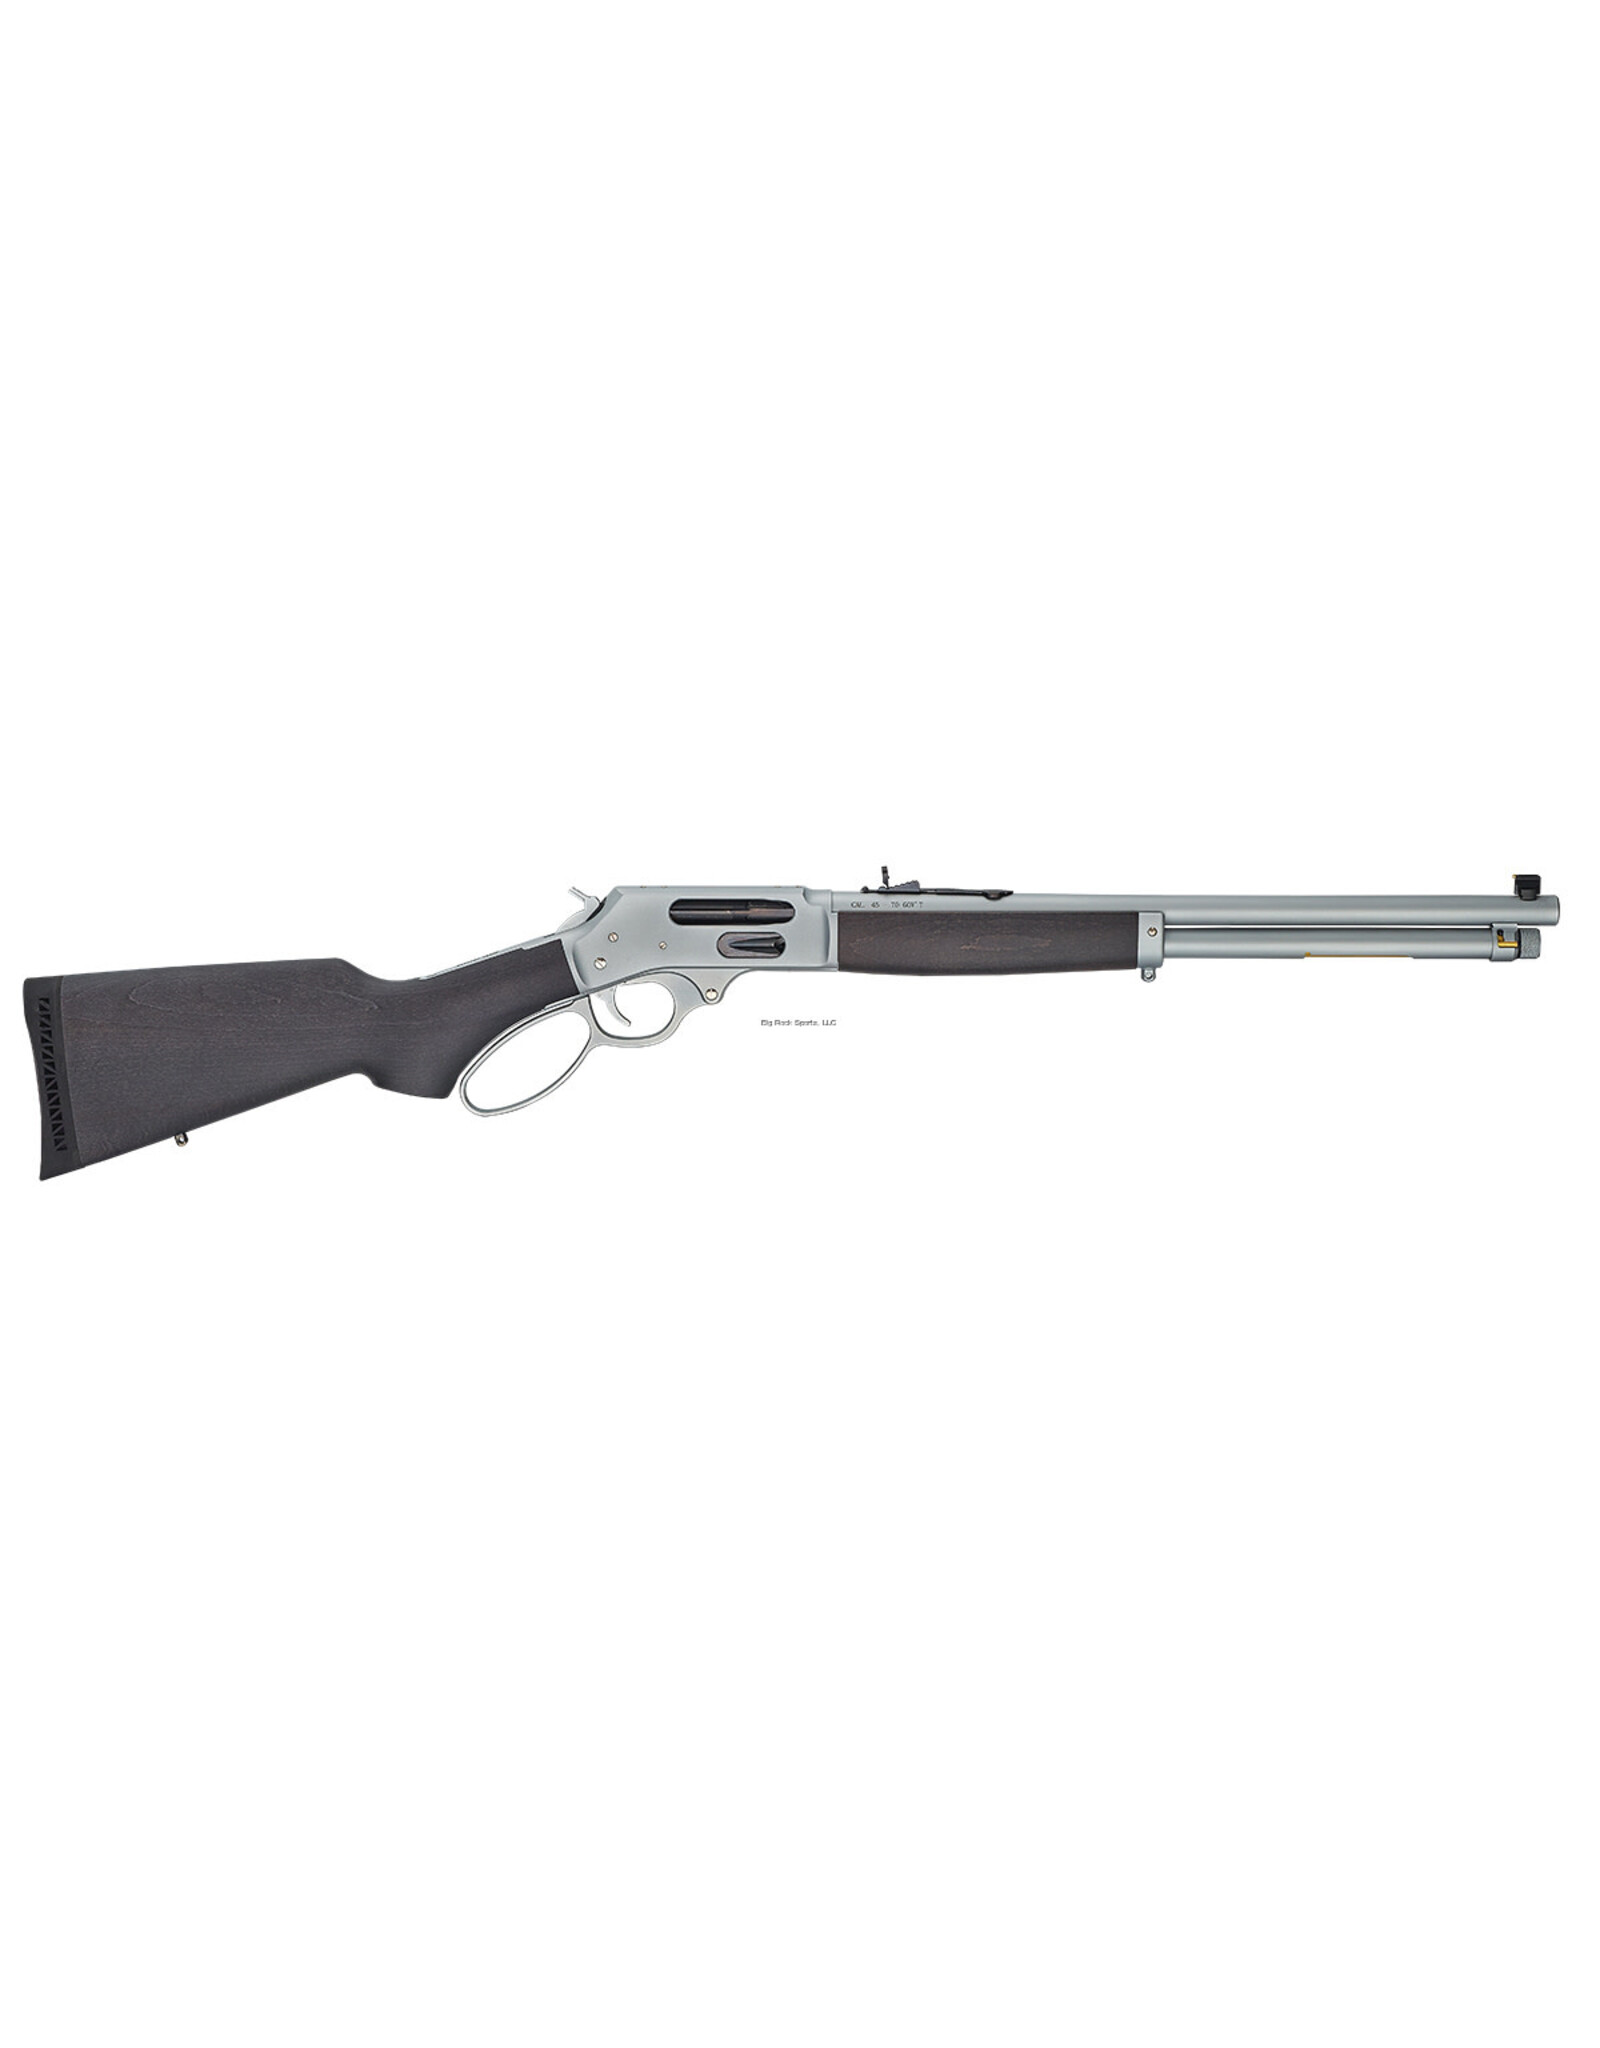 Henry Firearms Henry H010GAW All Weather Lever Action Rifle 45-70 Govt, 18.4" Bbl, Side Gate, Chrome Plated, Stained Hardwood Stock, 4+1 Rnd